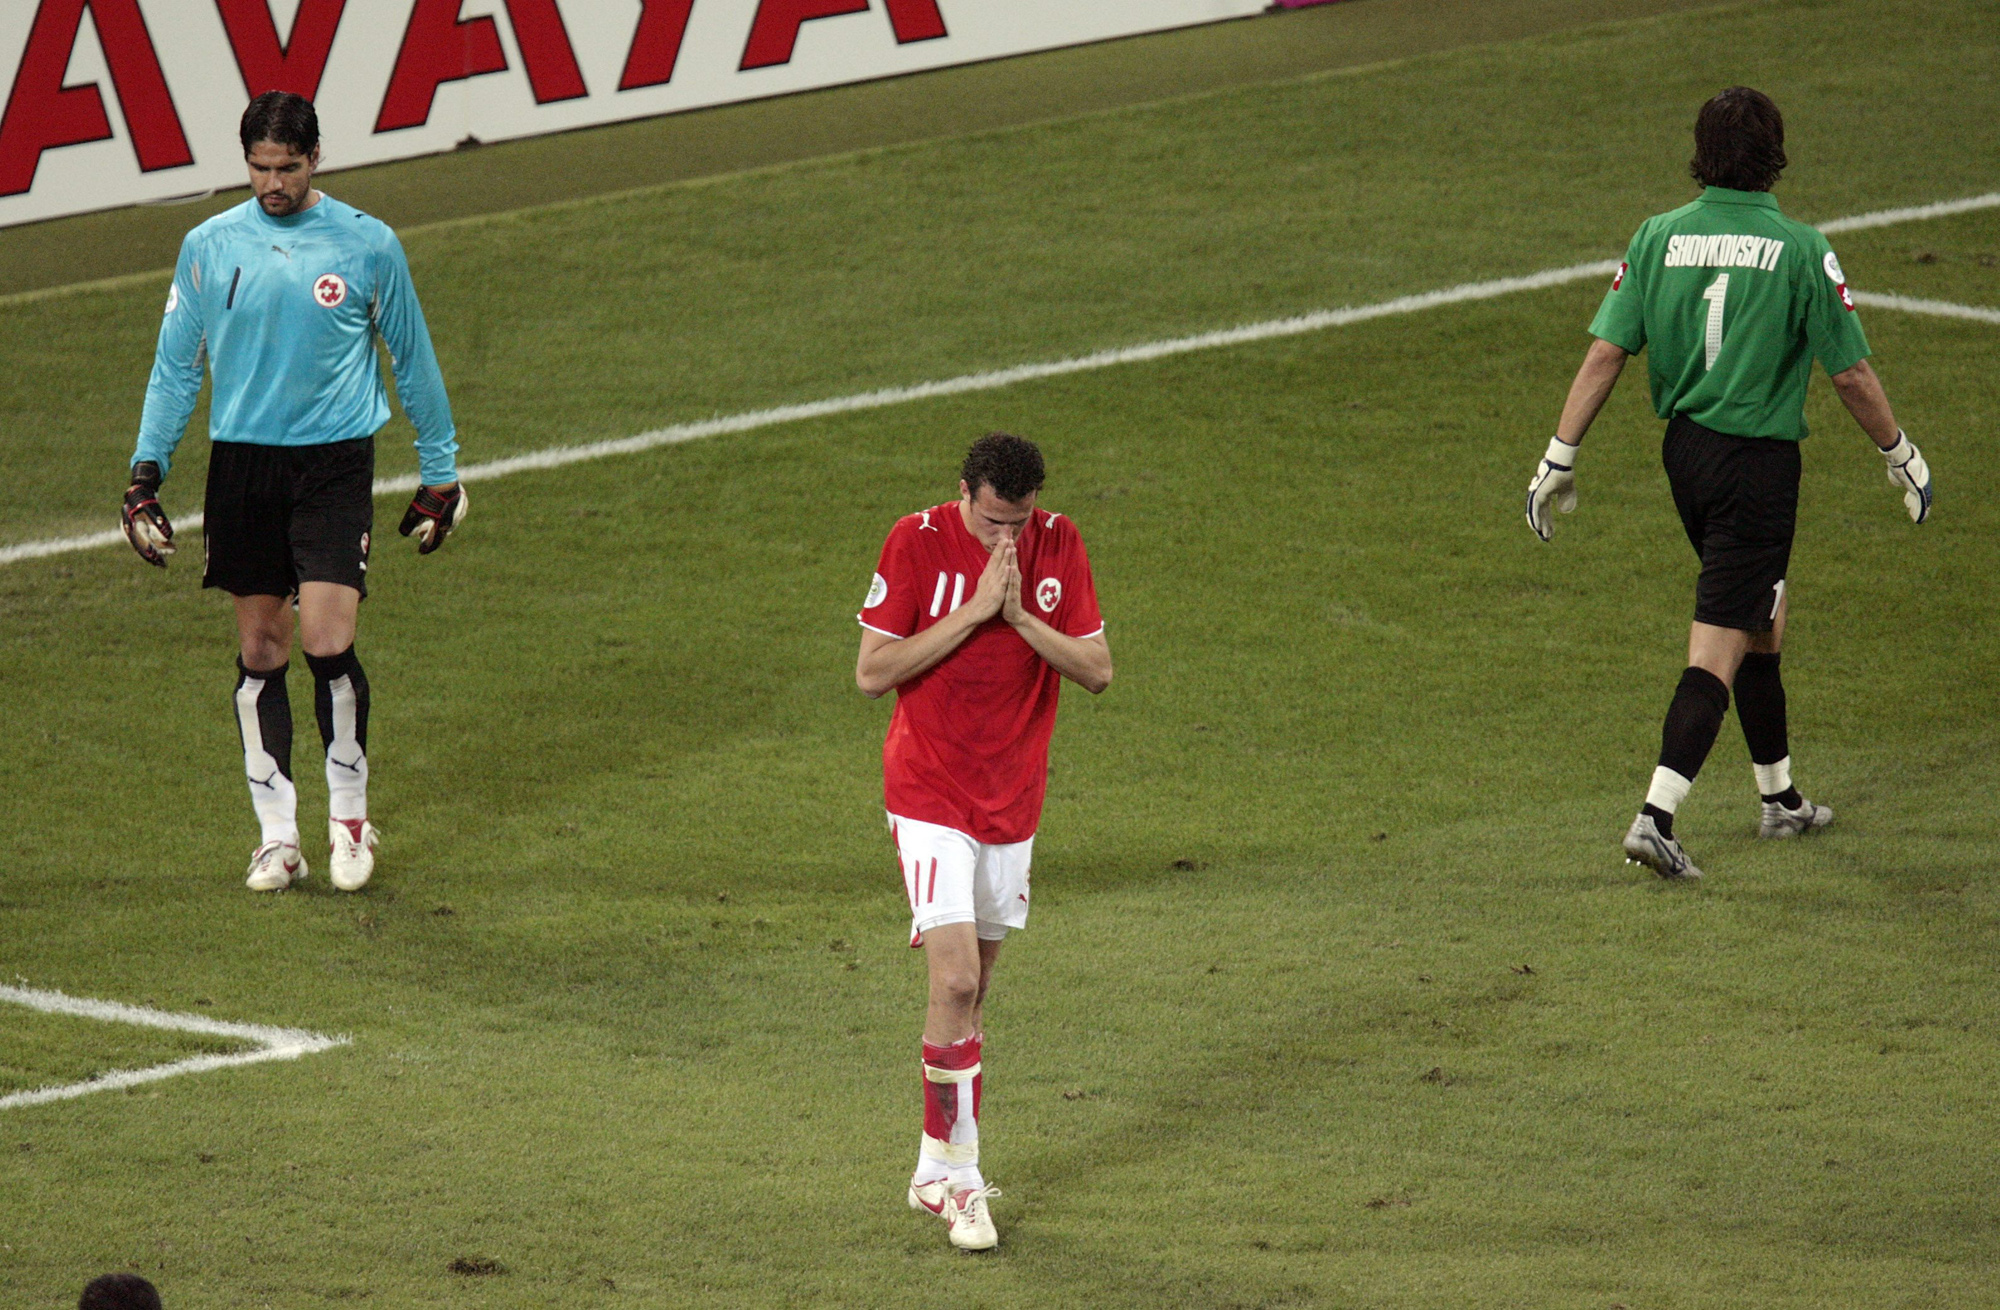 Marco Streller from Switzerland reacts during the penalty shoot out during the 2nd round match of the 2006 FIFA World Cup between Switzerland and Ukraine in Cologne, Germany, Monday 26 June 2006. On the left is Swiss keeper Pascal Zuberbuehler, on the right Ukranian keeper Oleksandr Shovkovskyi .(KEYSTONE/Eddy Risch) ** MOBILE/PDA USAGE OUT **